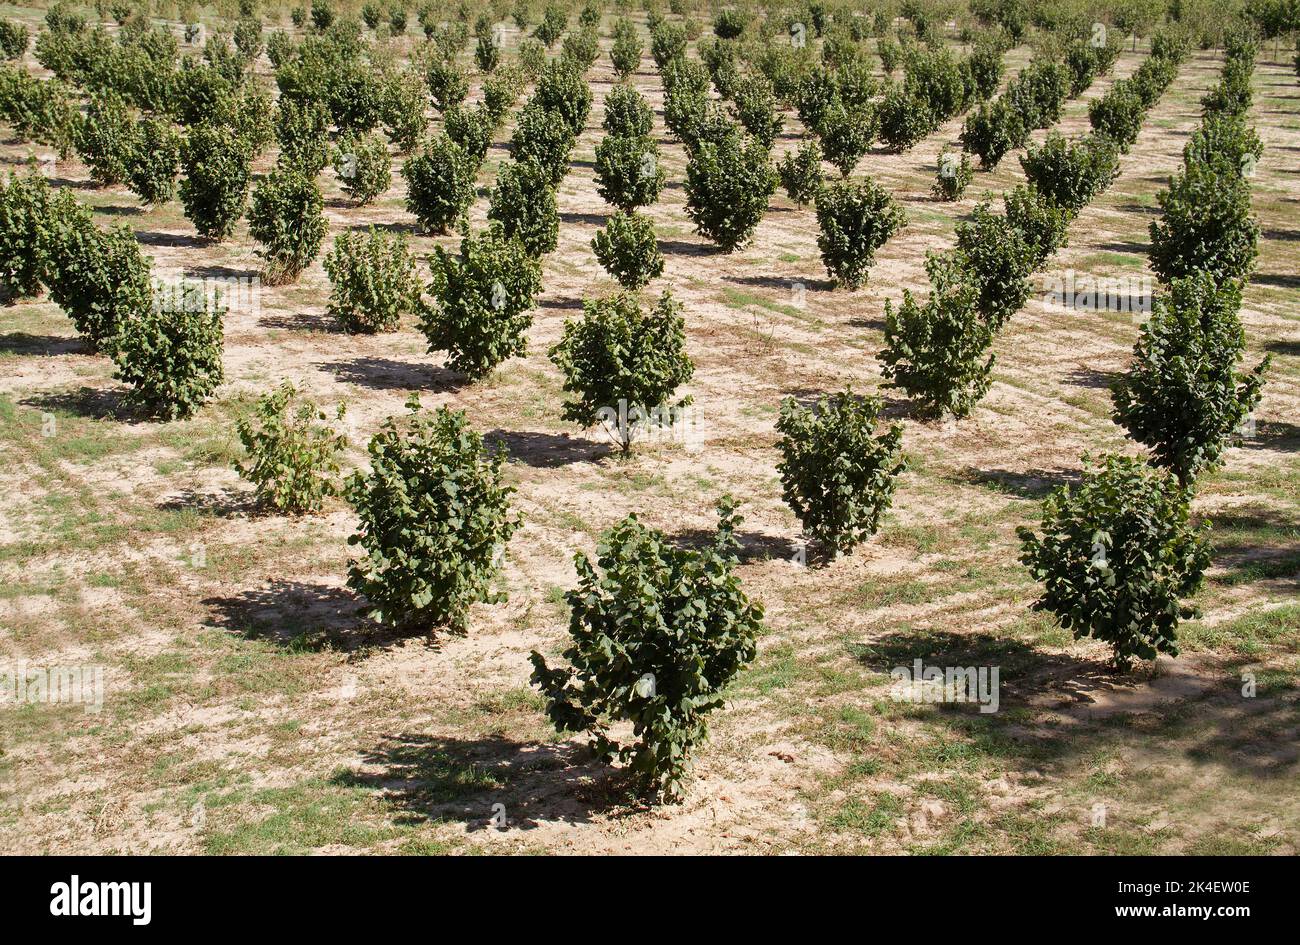 Young Hazel trees in rows in a hazelnut orchard Stock Photo